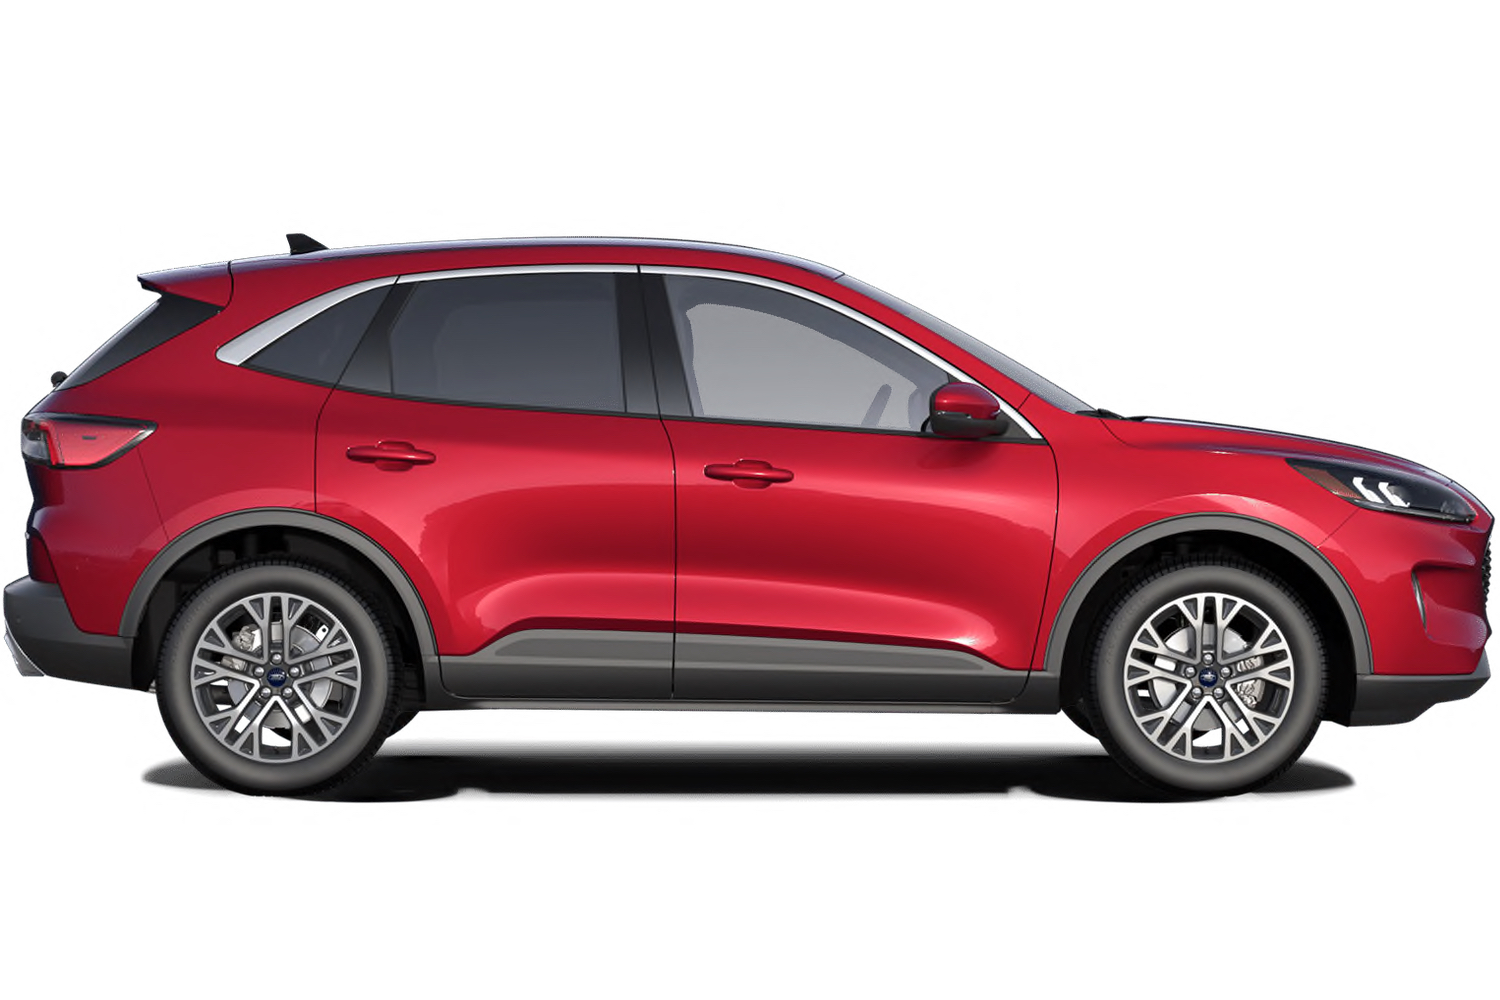 2020 Ford Escape Gets New Rapid Red Color: First Look